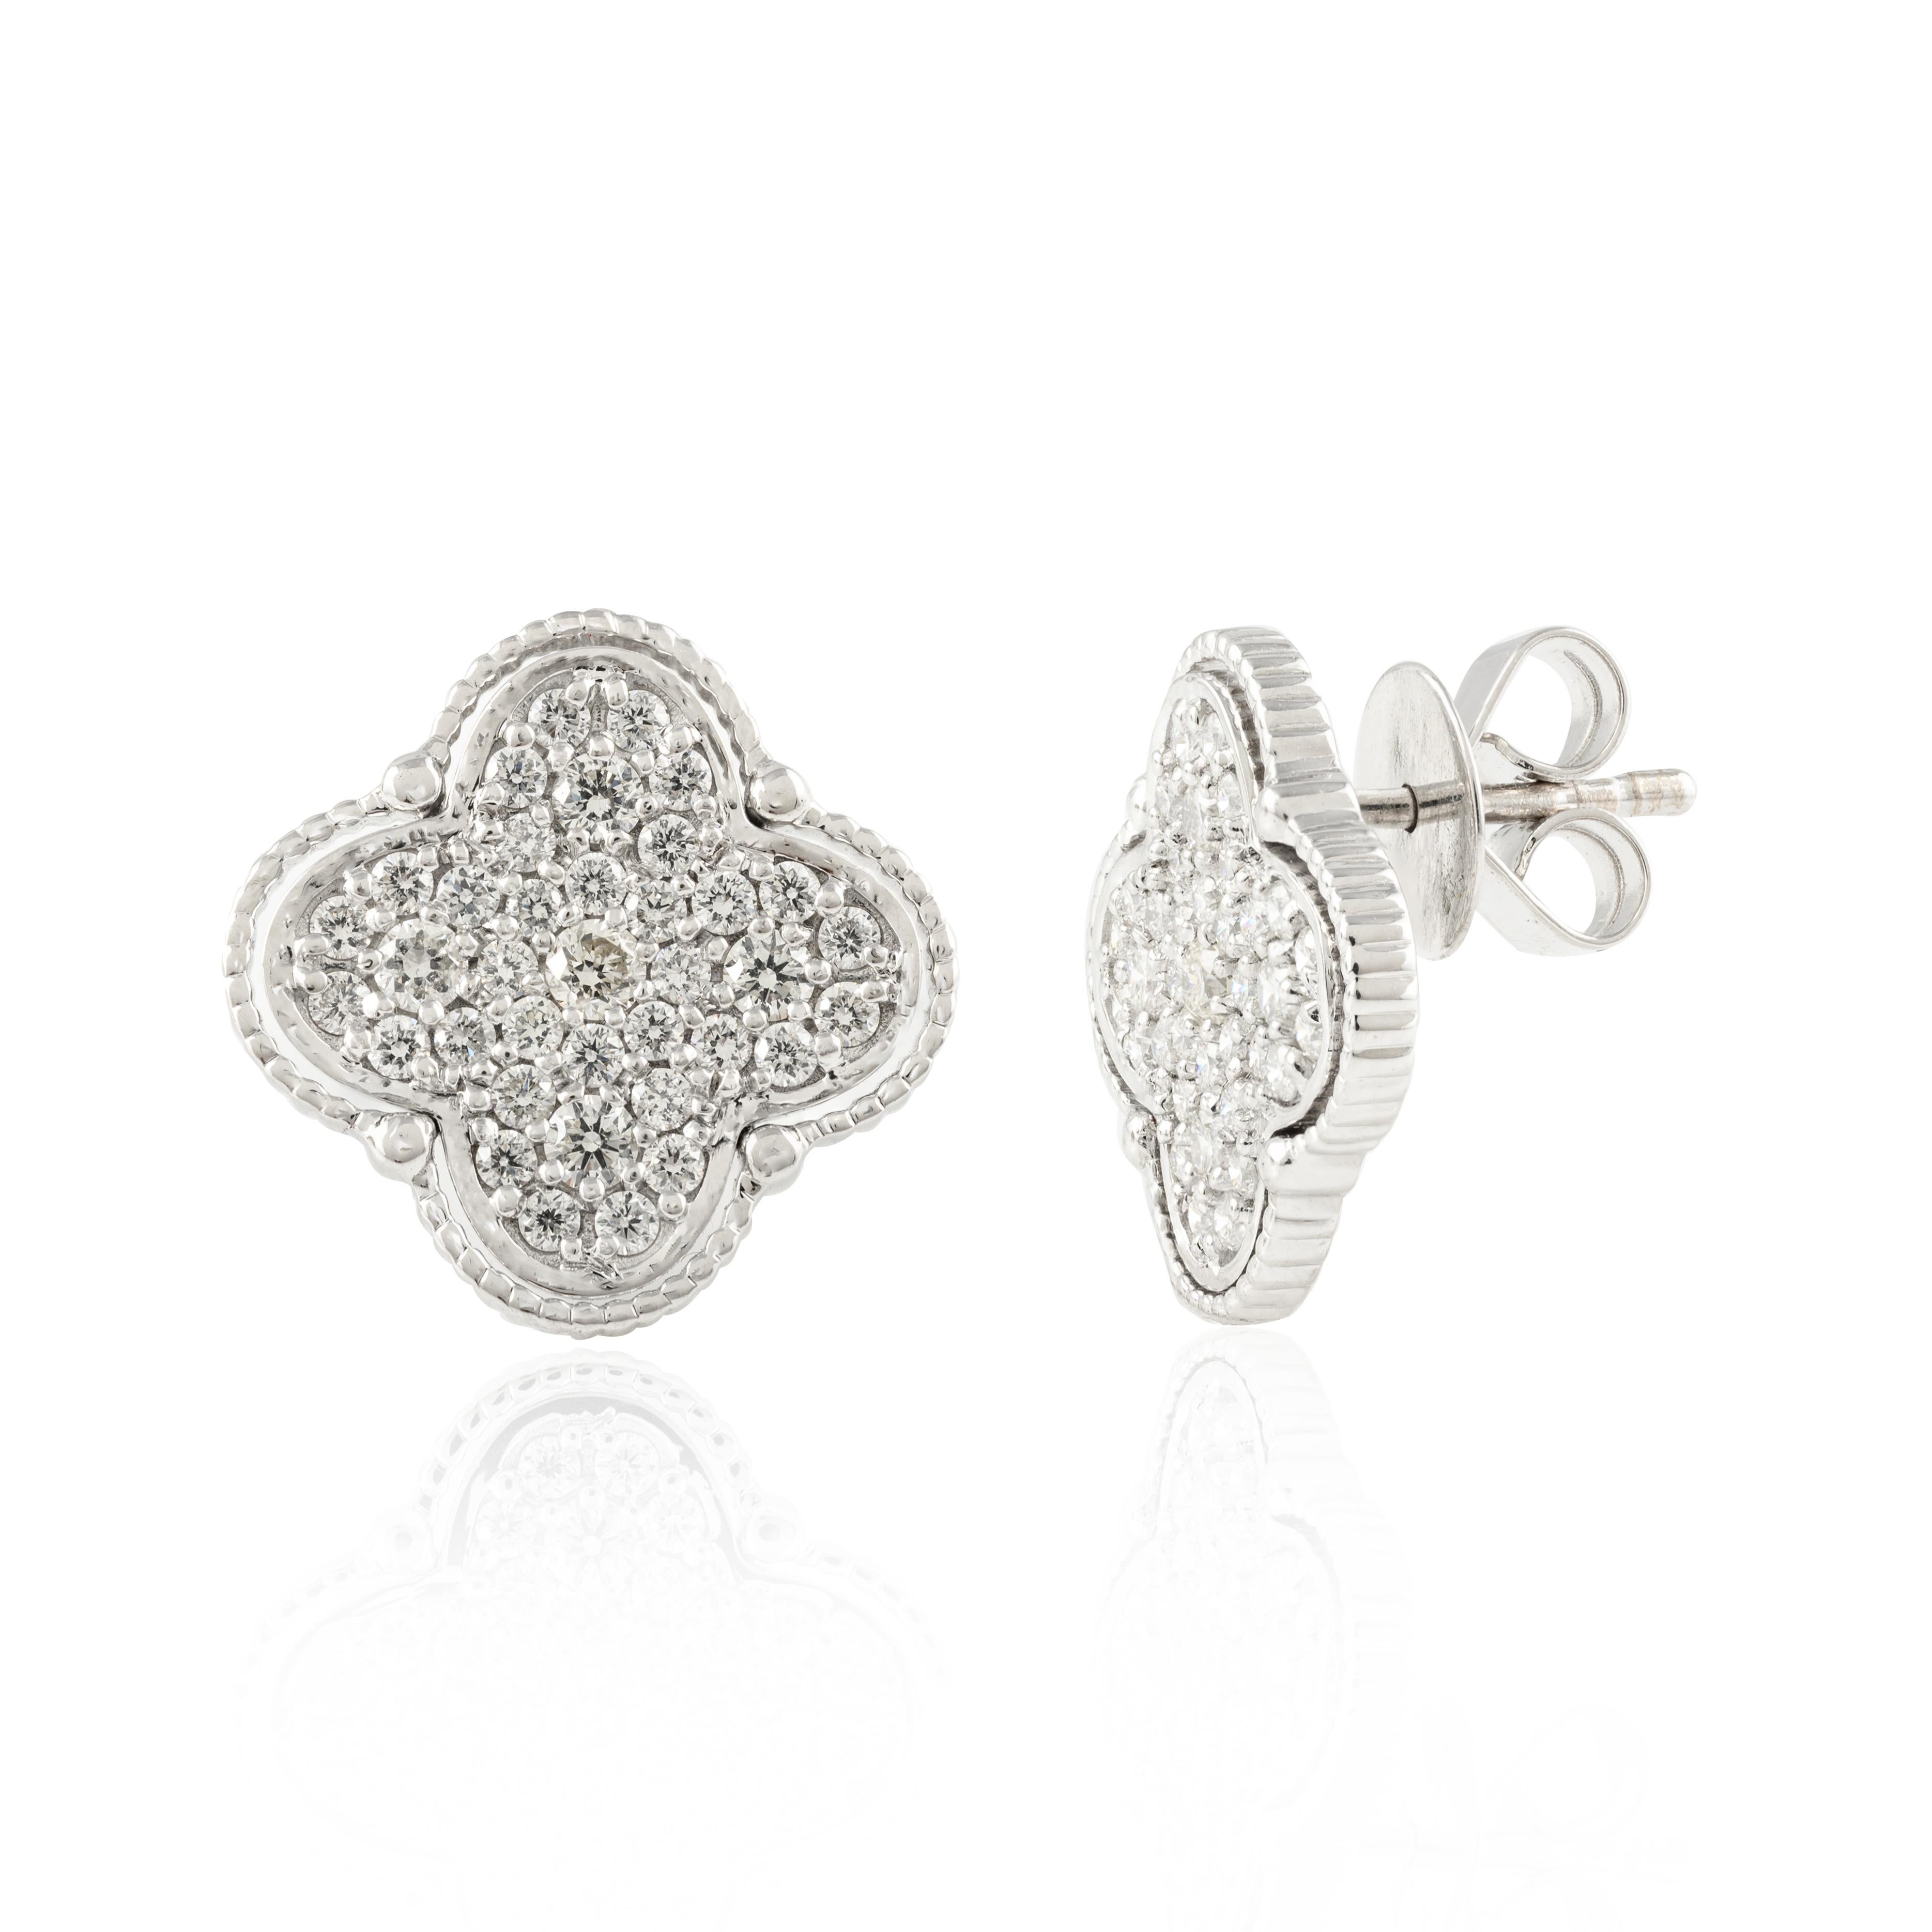 Statement Pave Diamond Clover Studs Earrings in 18K Gold to make a statement with your look. You shall need stud earrings to make a statement with your look. These earrings create a sparkling, luxurious look featuring round cut diamonds.
April